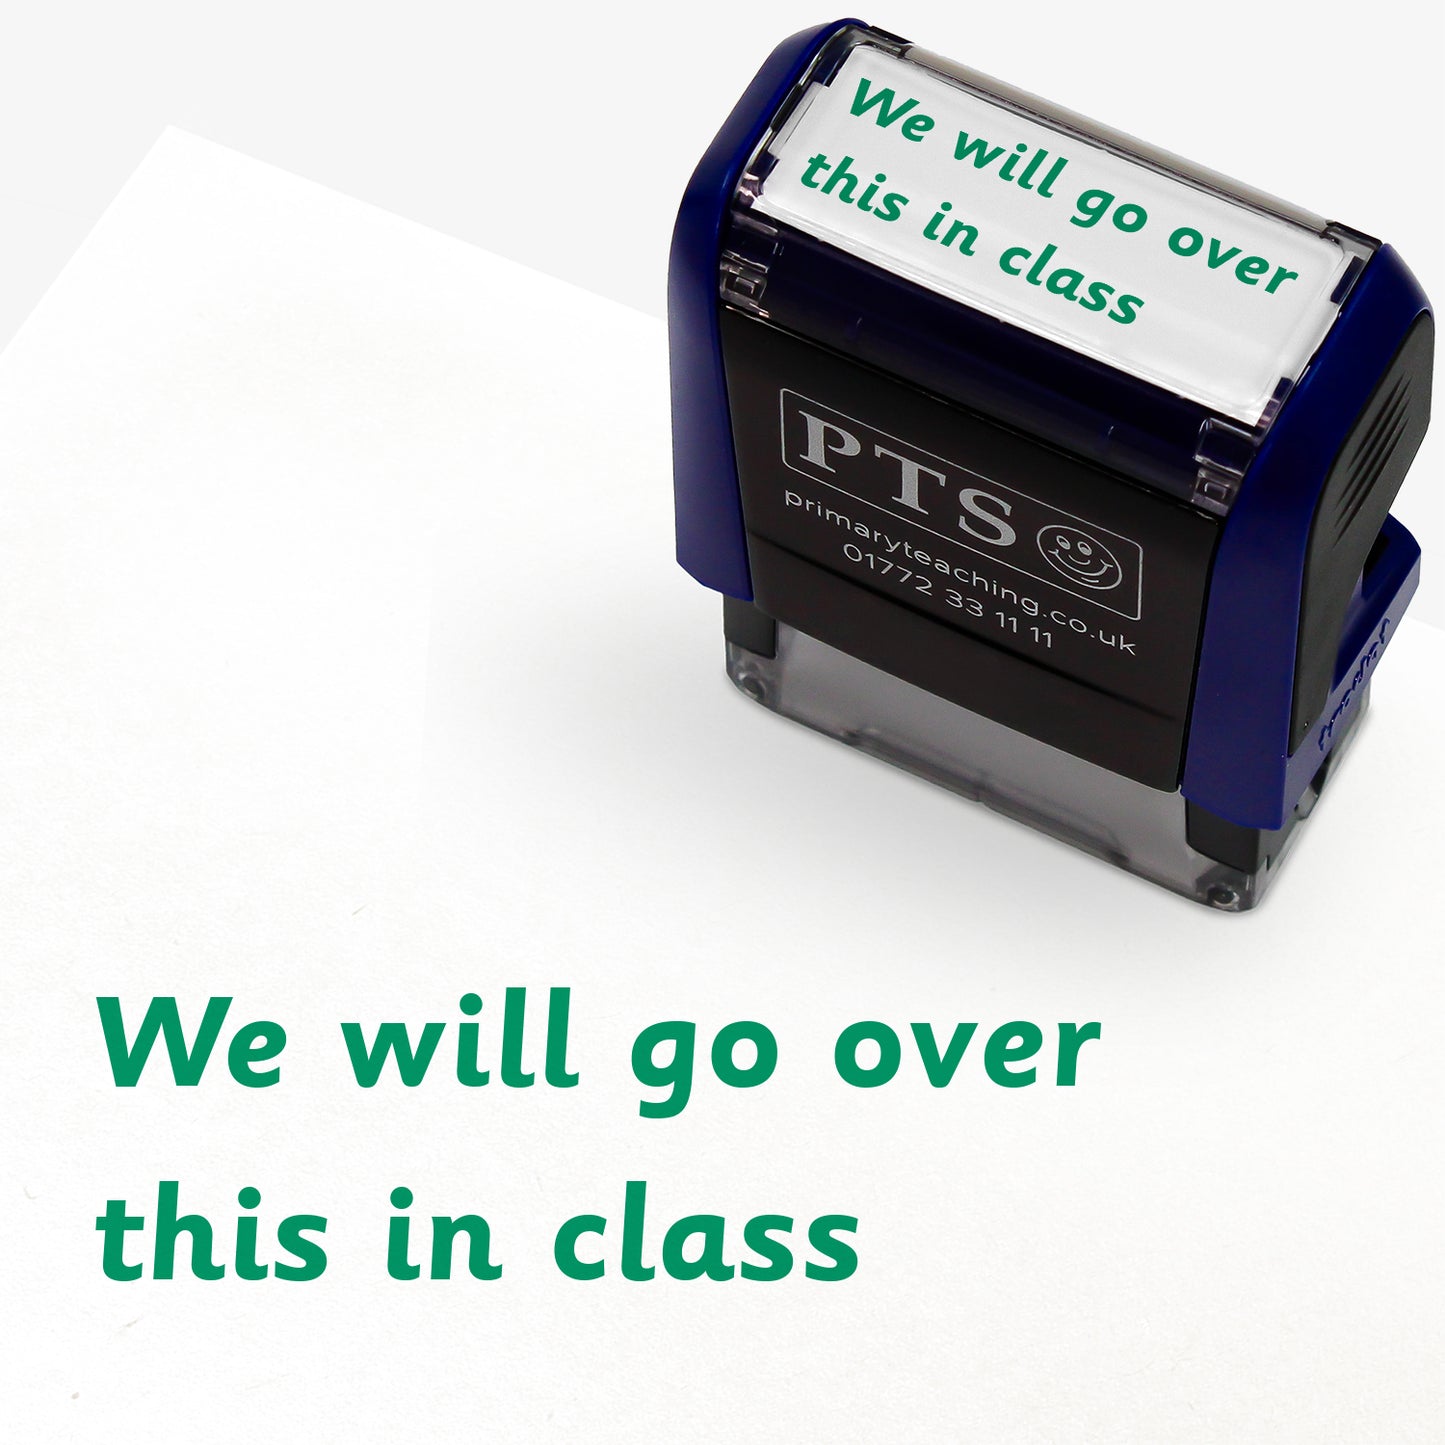 We Will Go Over This in Class Stamper - 38 x 15mm